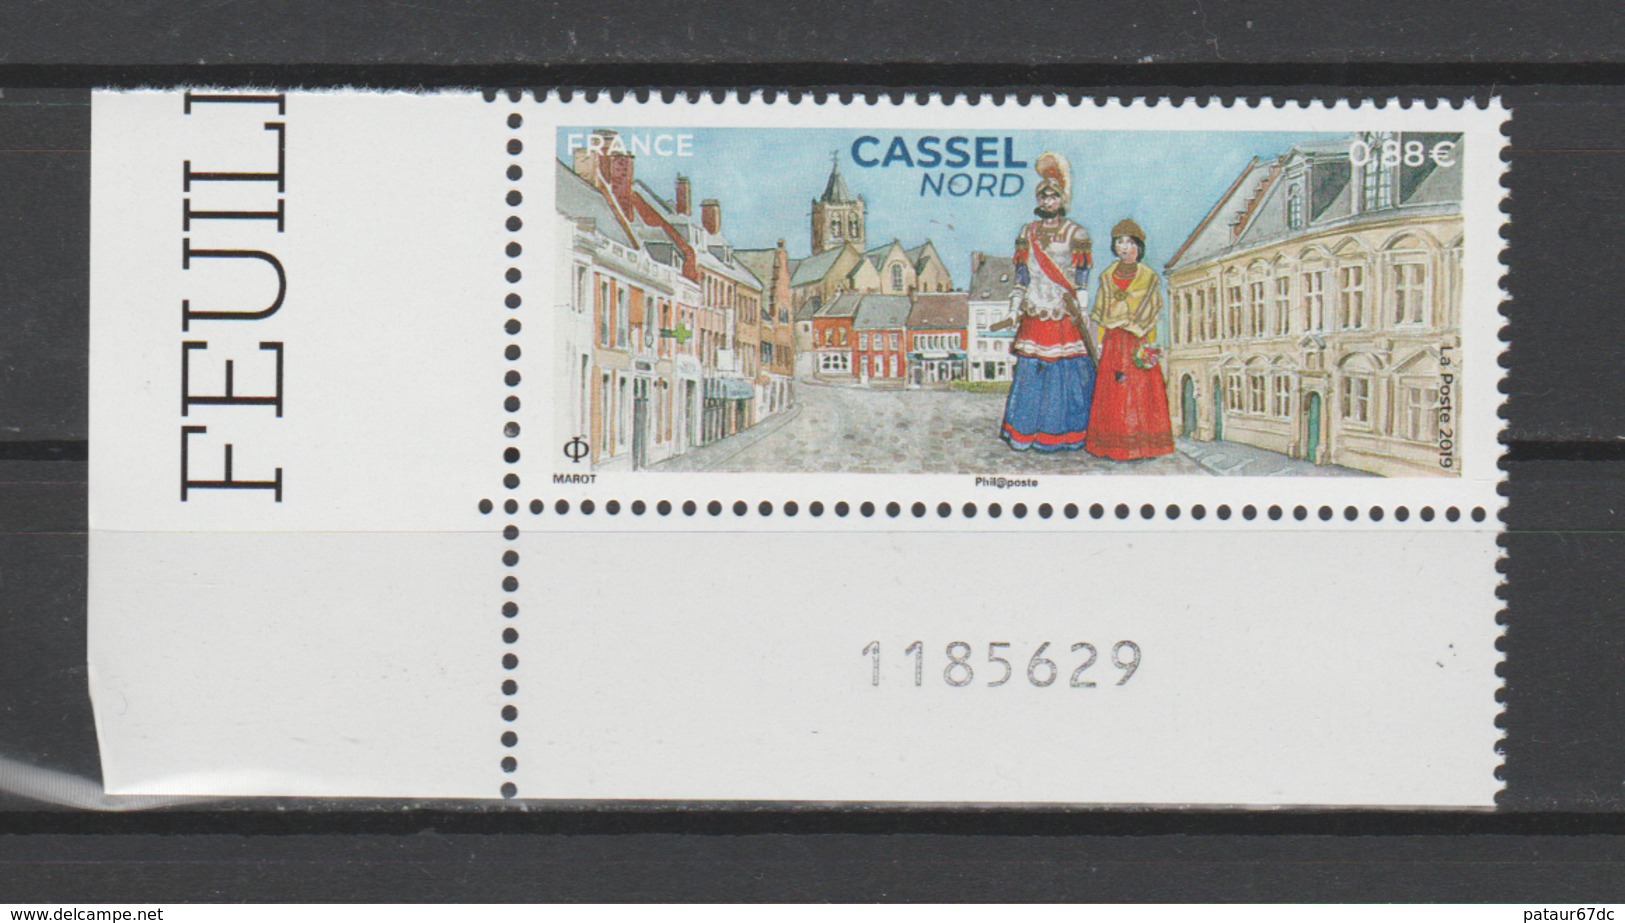 FRANCE / 2019 / Y&T N° 5336 ** : Cassel (Nord) CdF Inf G - Gomme D'origine Intacte - Neufs